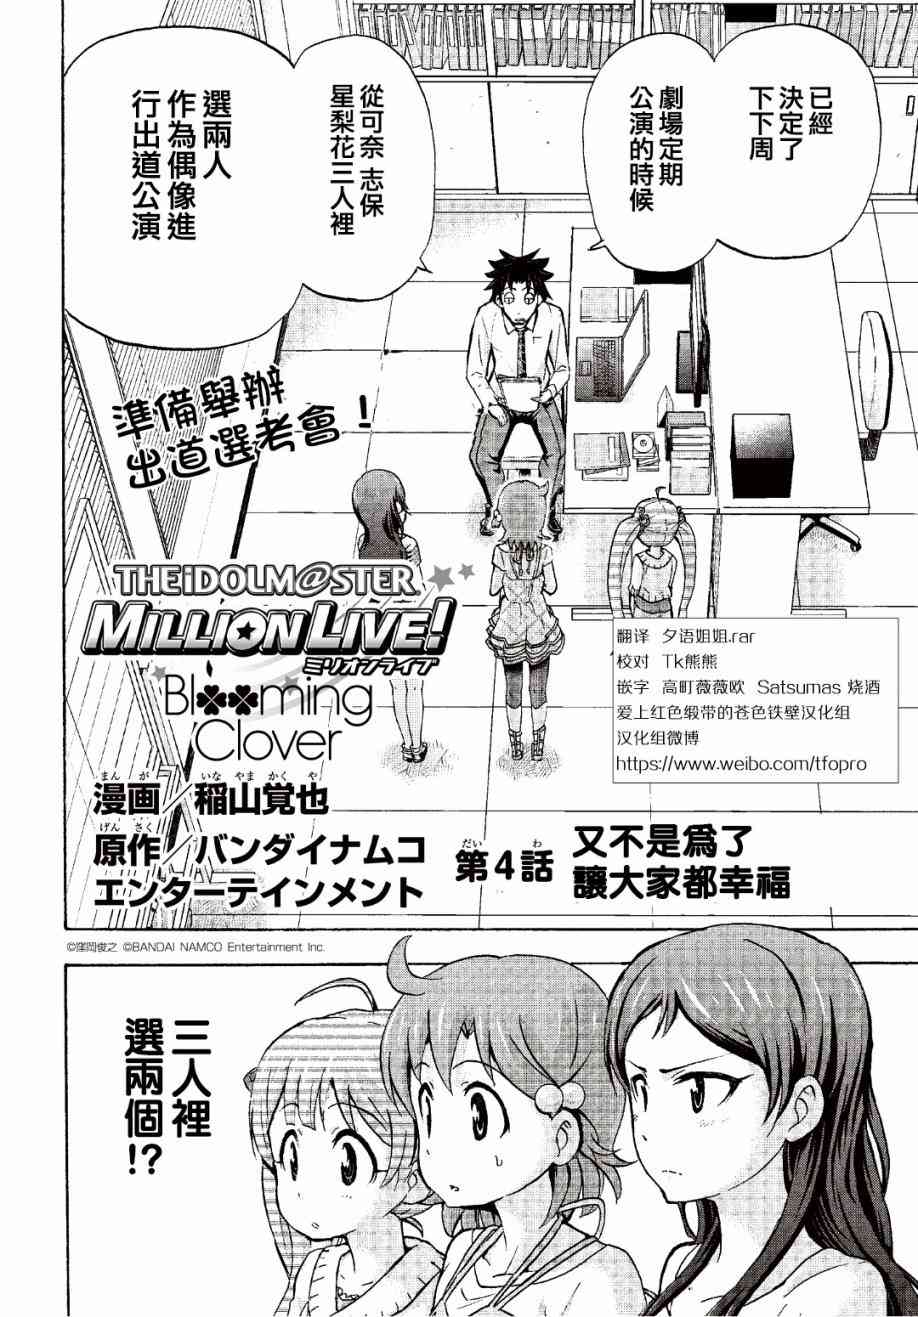 THE IDOLM@STER MILLION LIVE! Blooming Clover - 4話 - 4